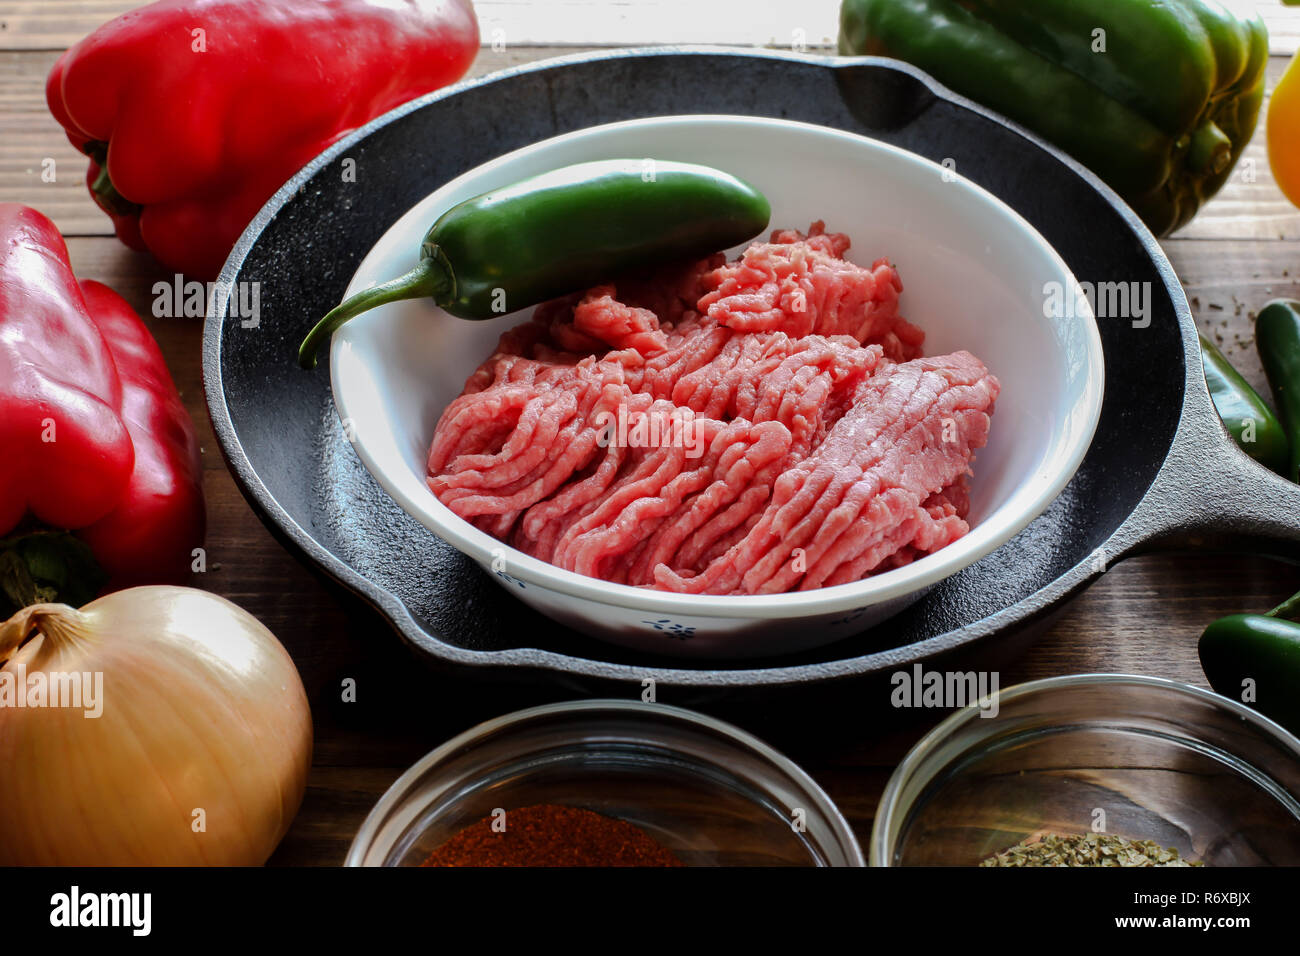 Raw ground beef inside skillet with peppers and other cooking ingredience around with wooden background side view Stock Photo